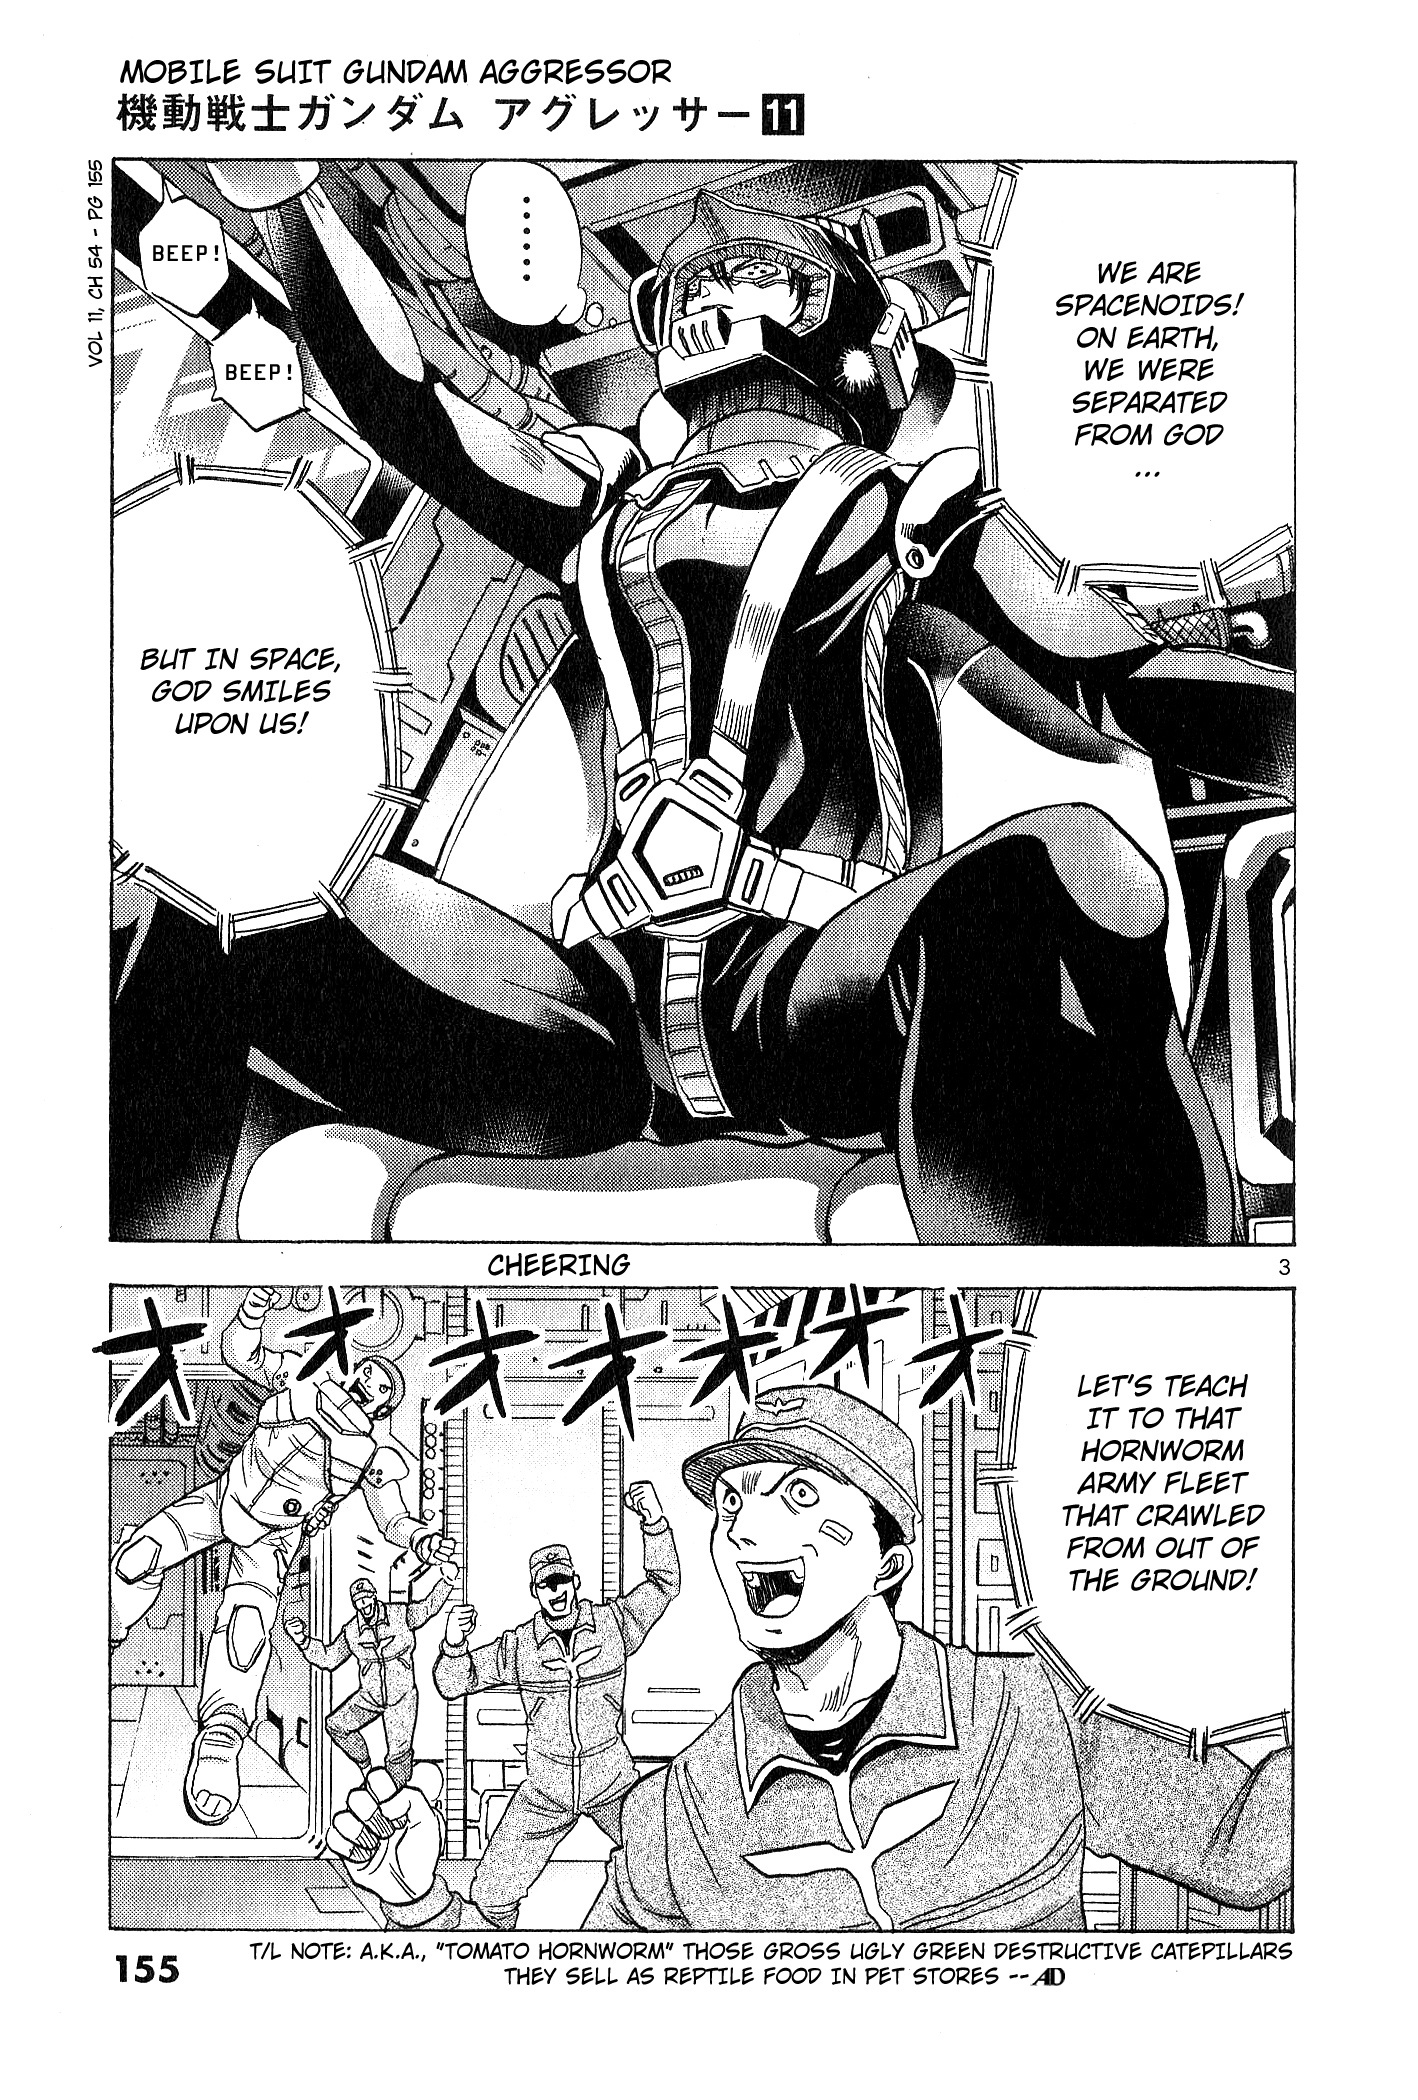 Mobile Suit Gundam Aggressor Vol.11 Chapter 54 - Picture 3